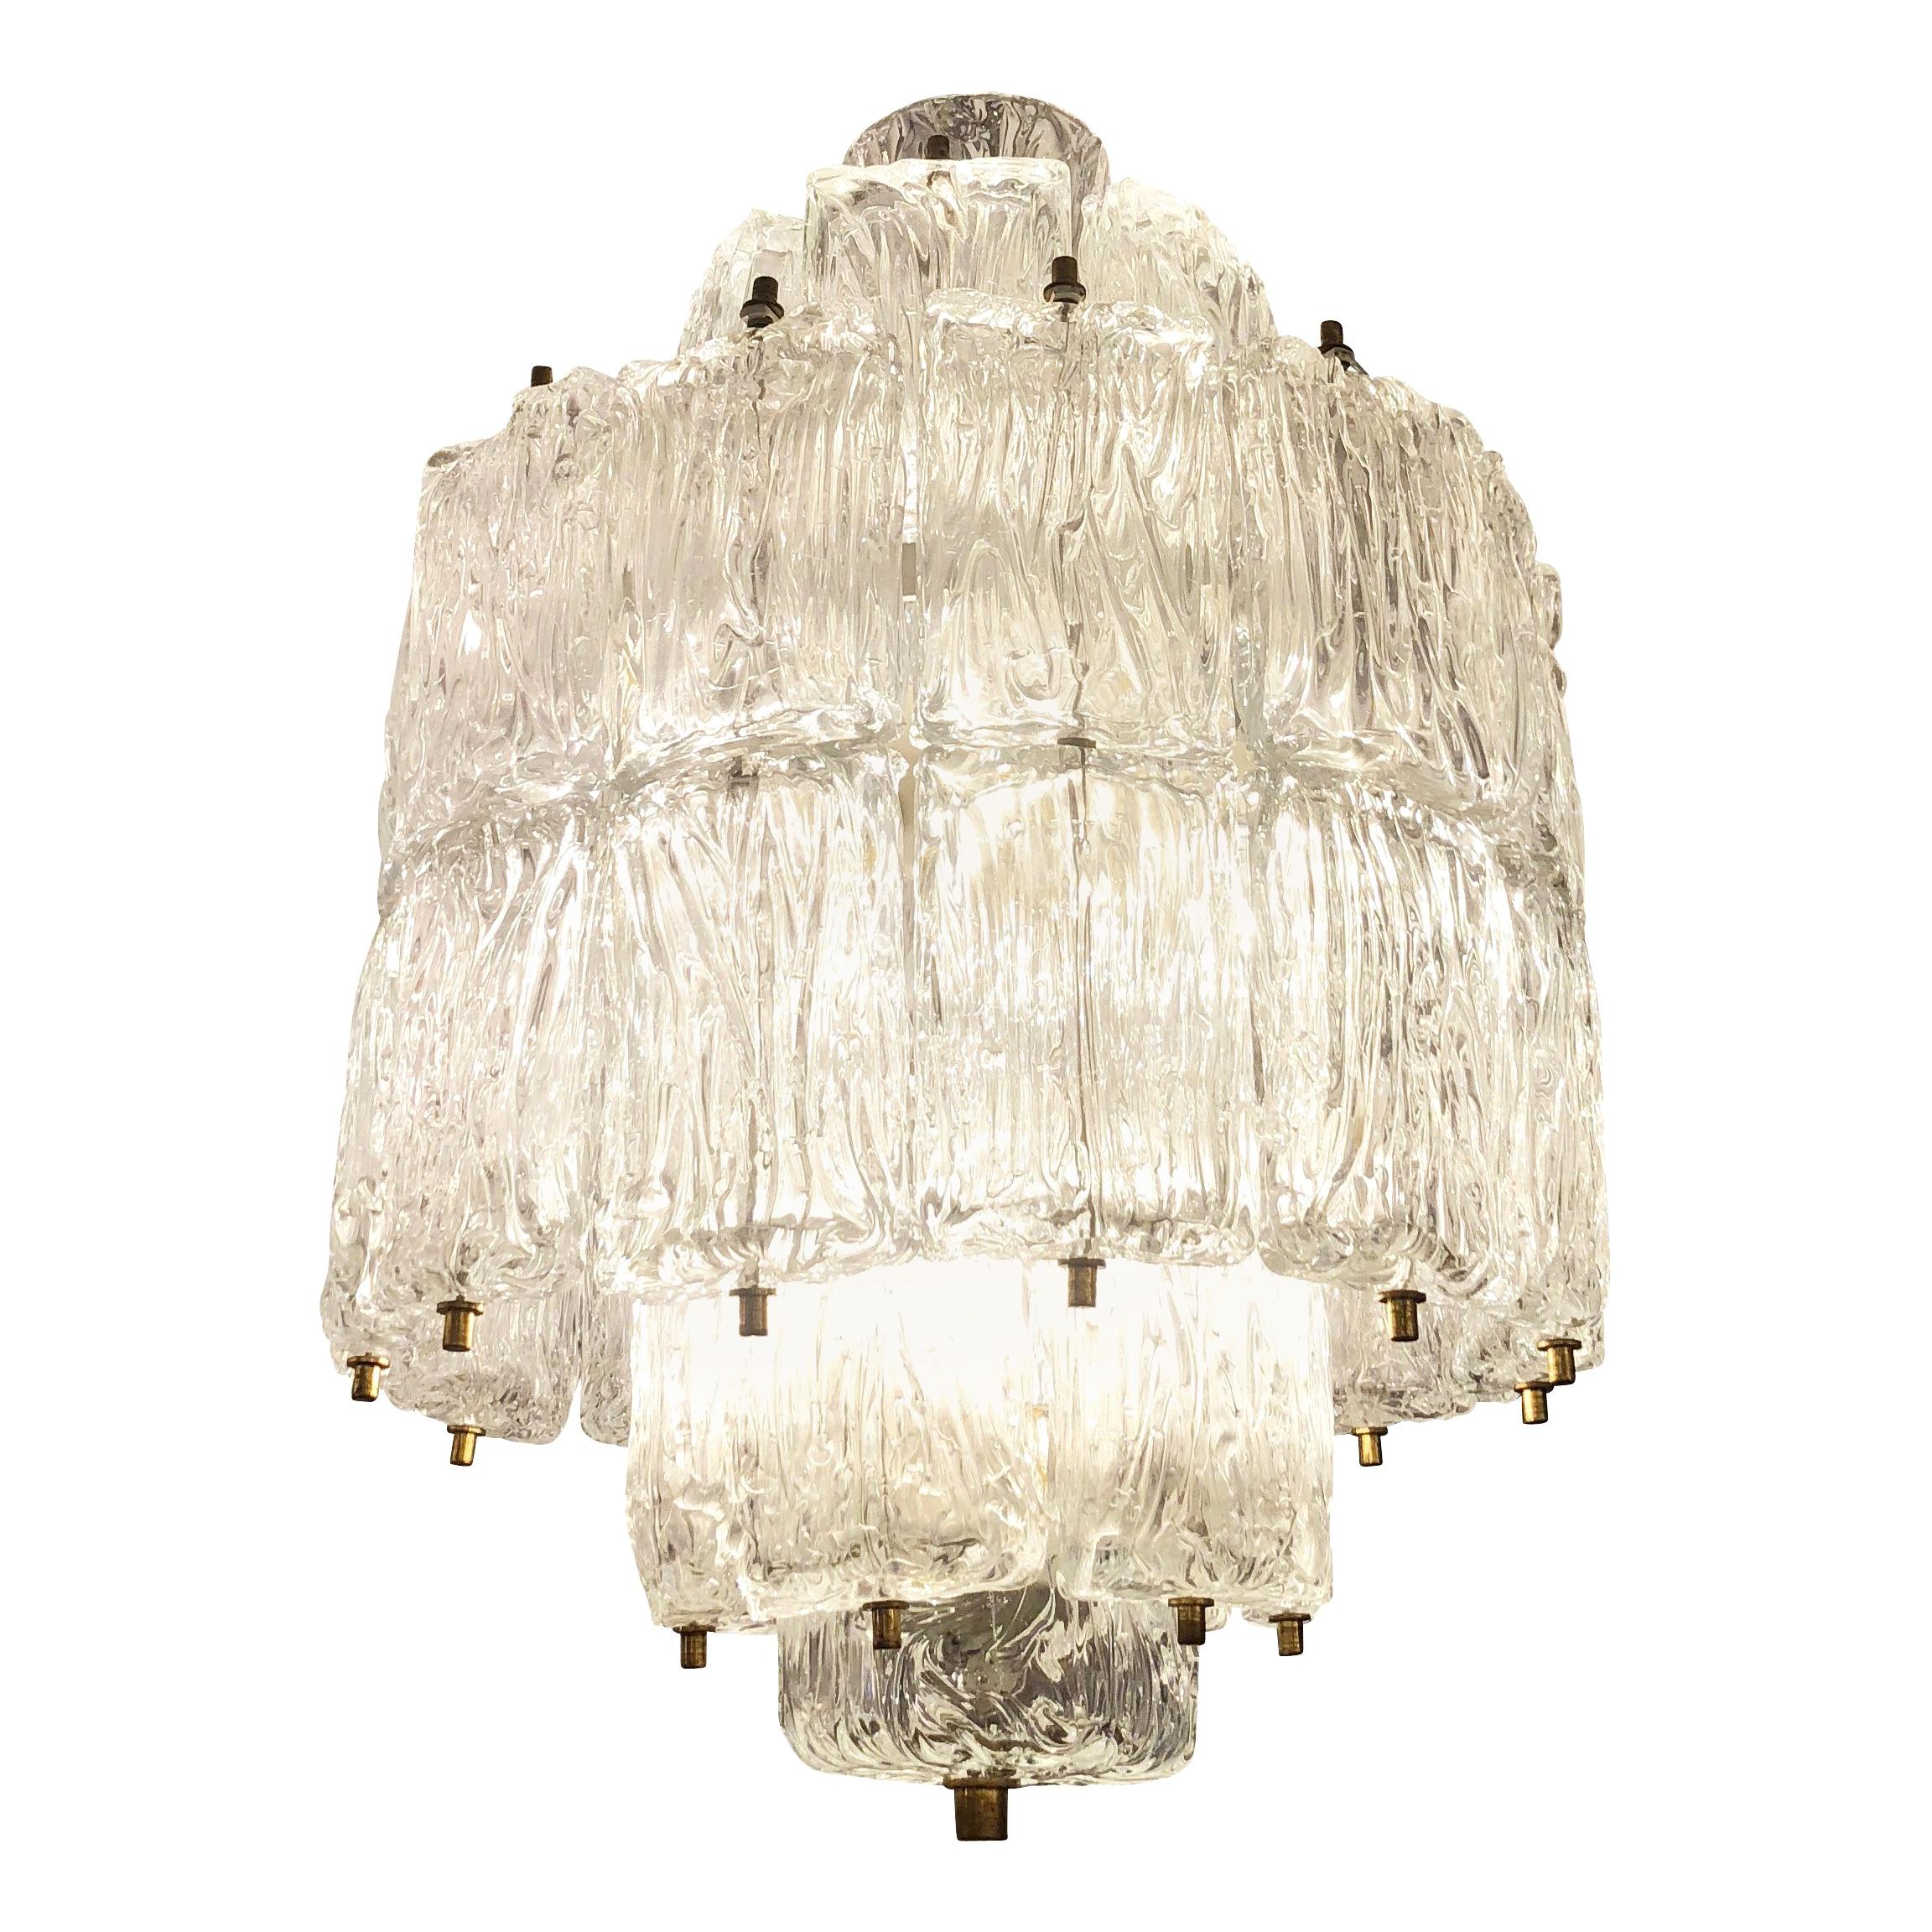 Textured Glass Barovier and Toso Chandelier, Italy, 1950s